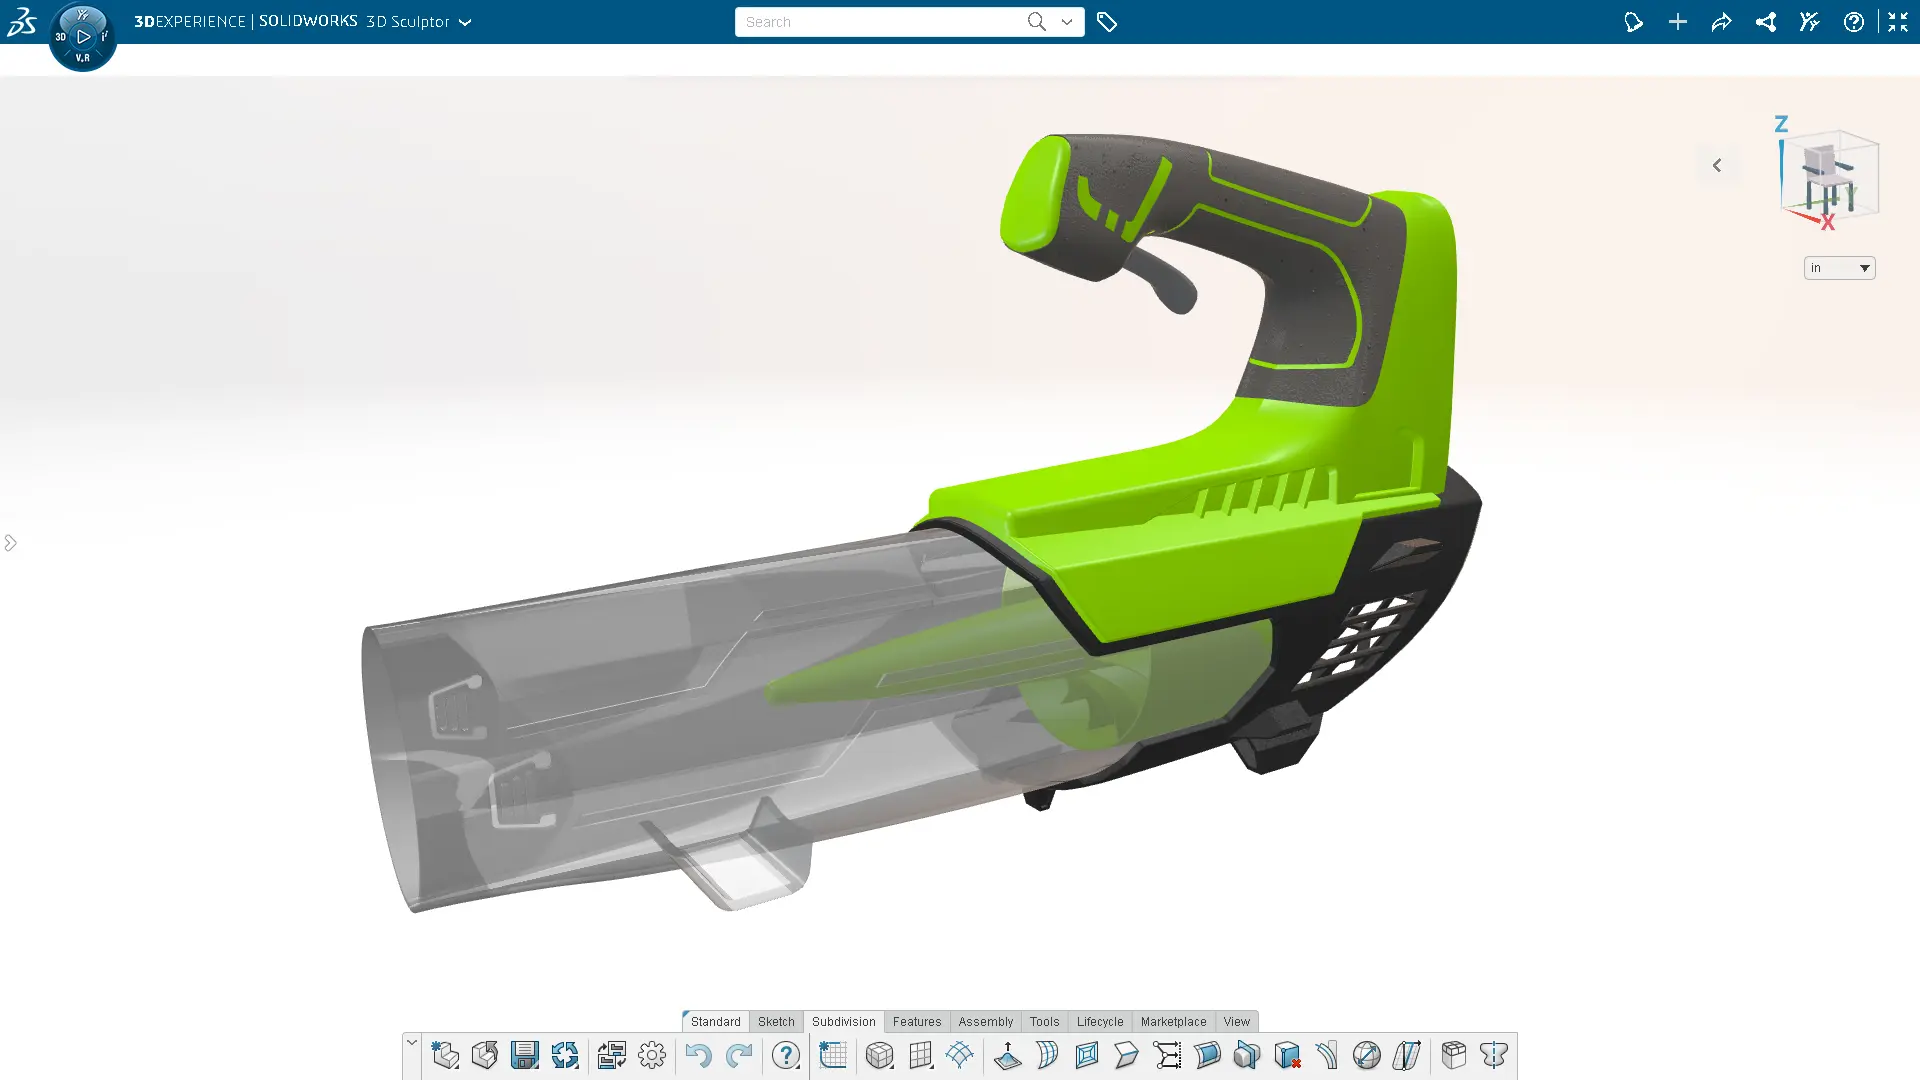 Image of completed bright green leafblower at end of development phase.